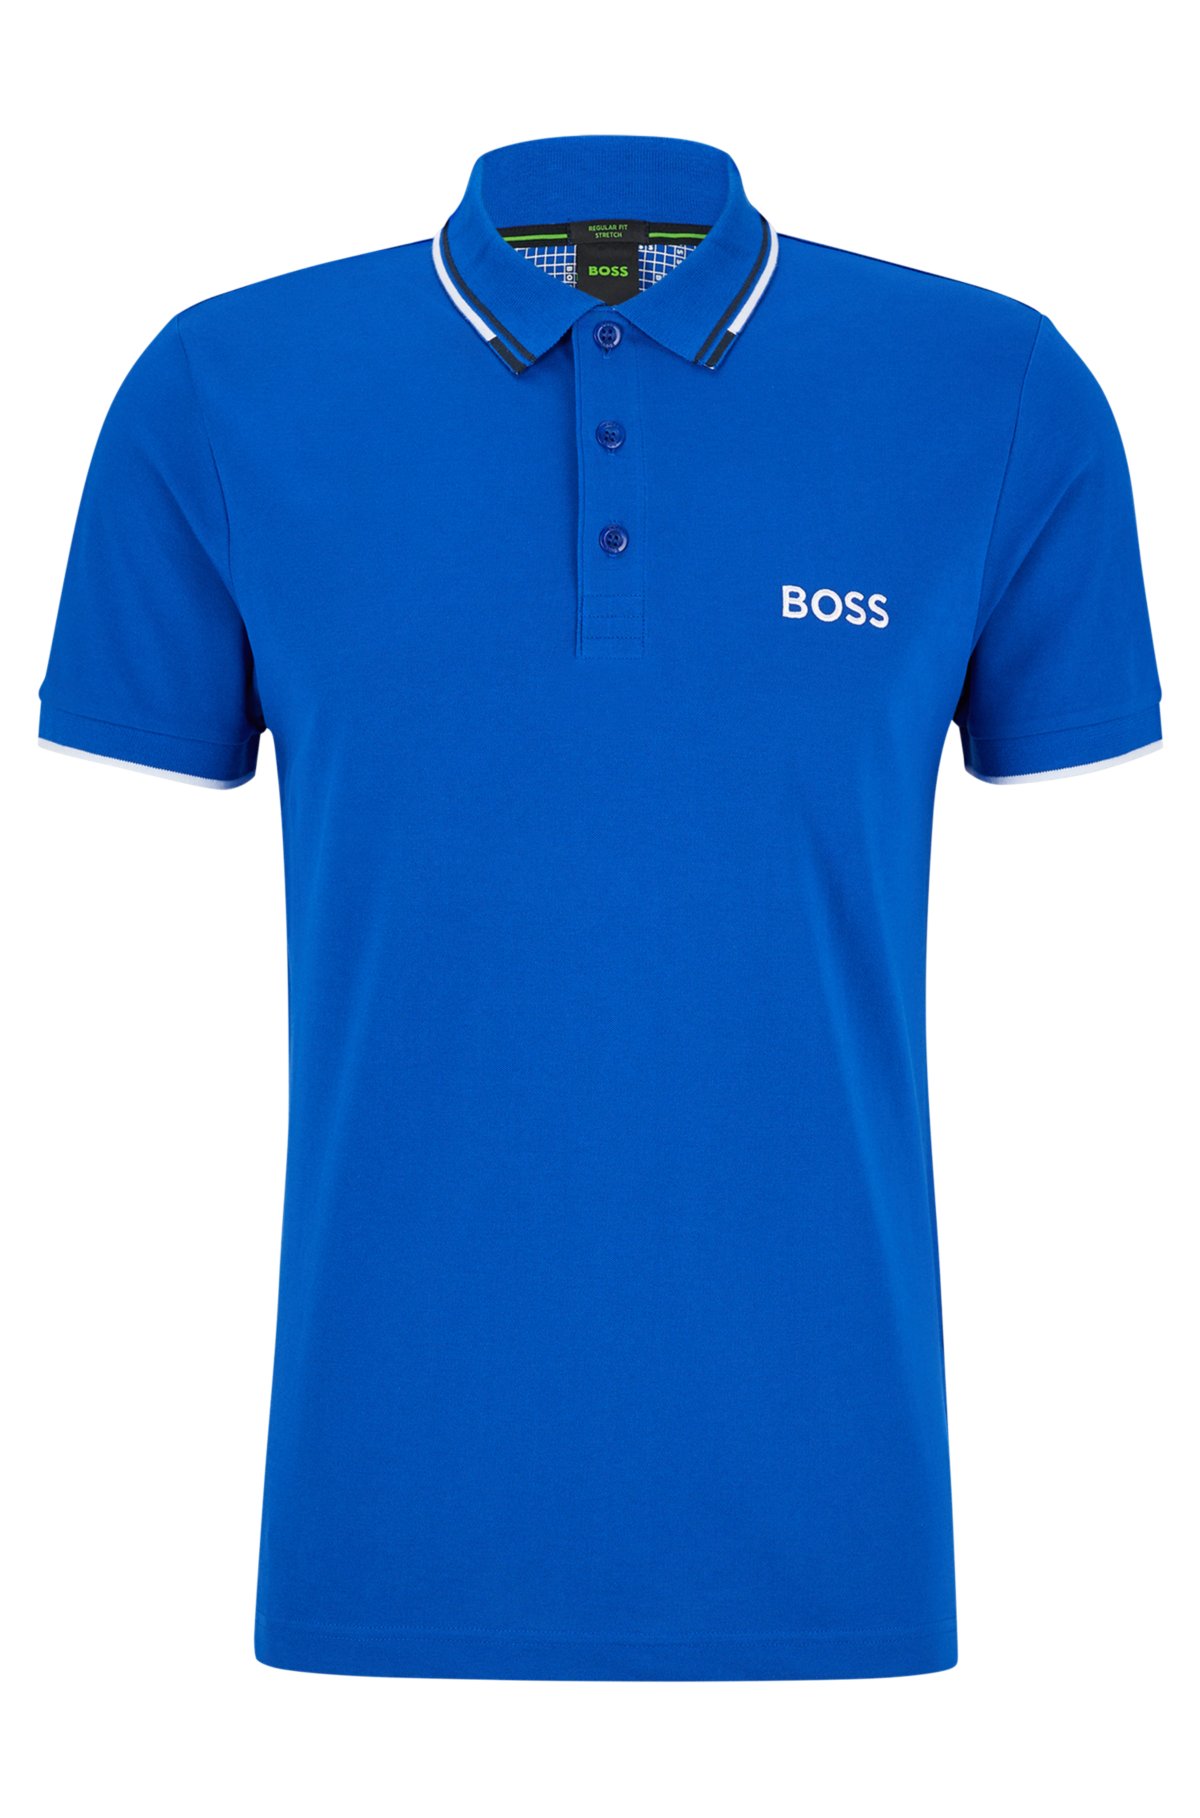 BOSS - Cotton-blend details with polo contrast shirt